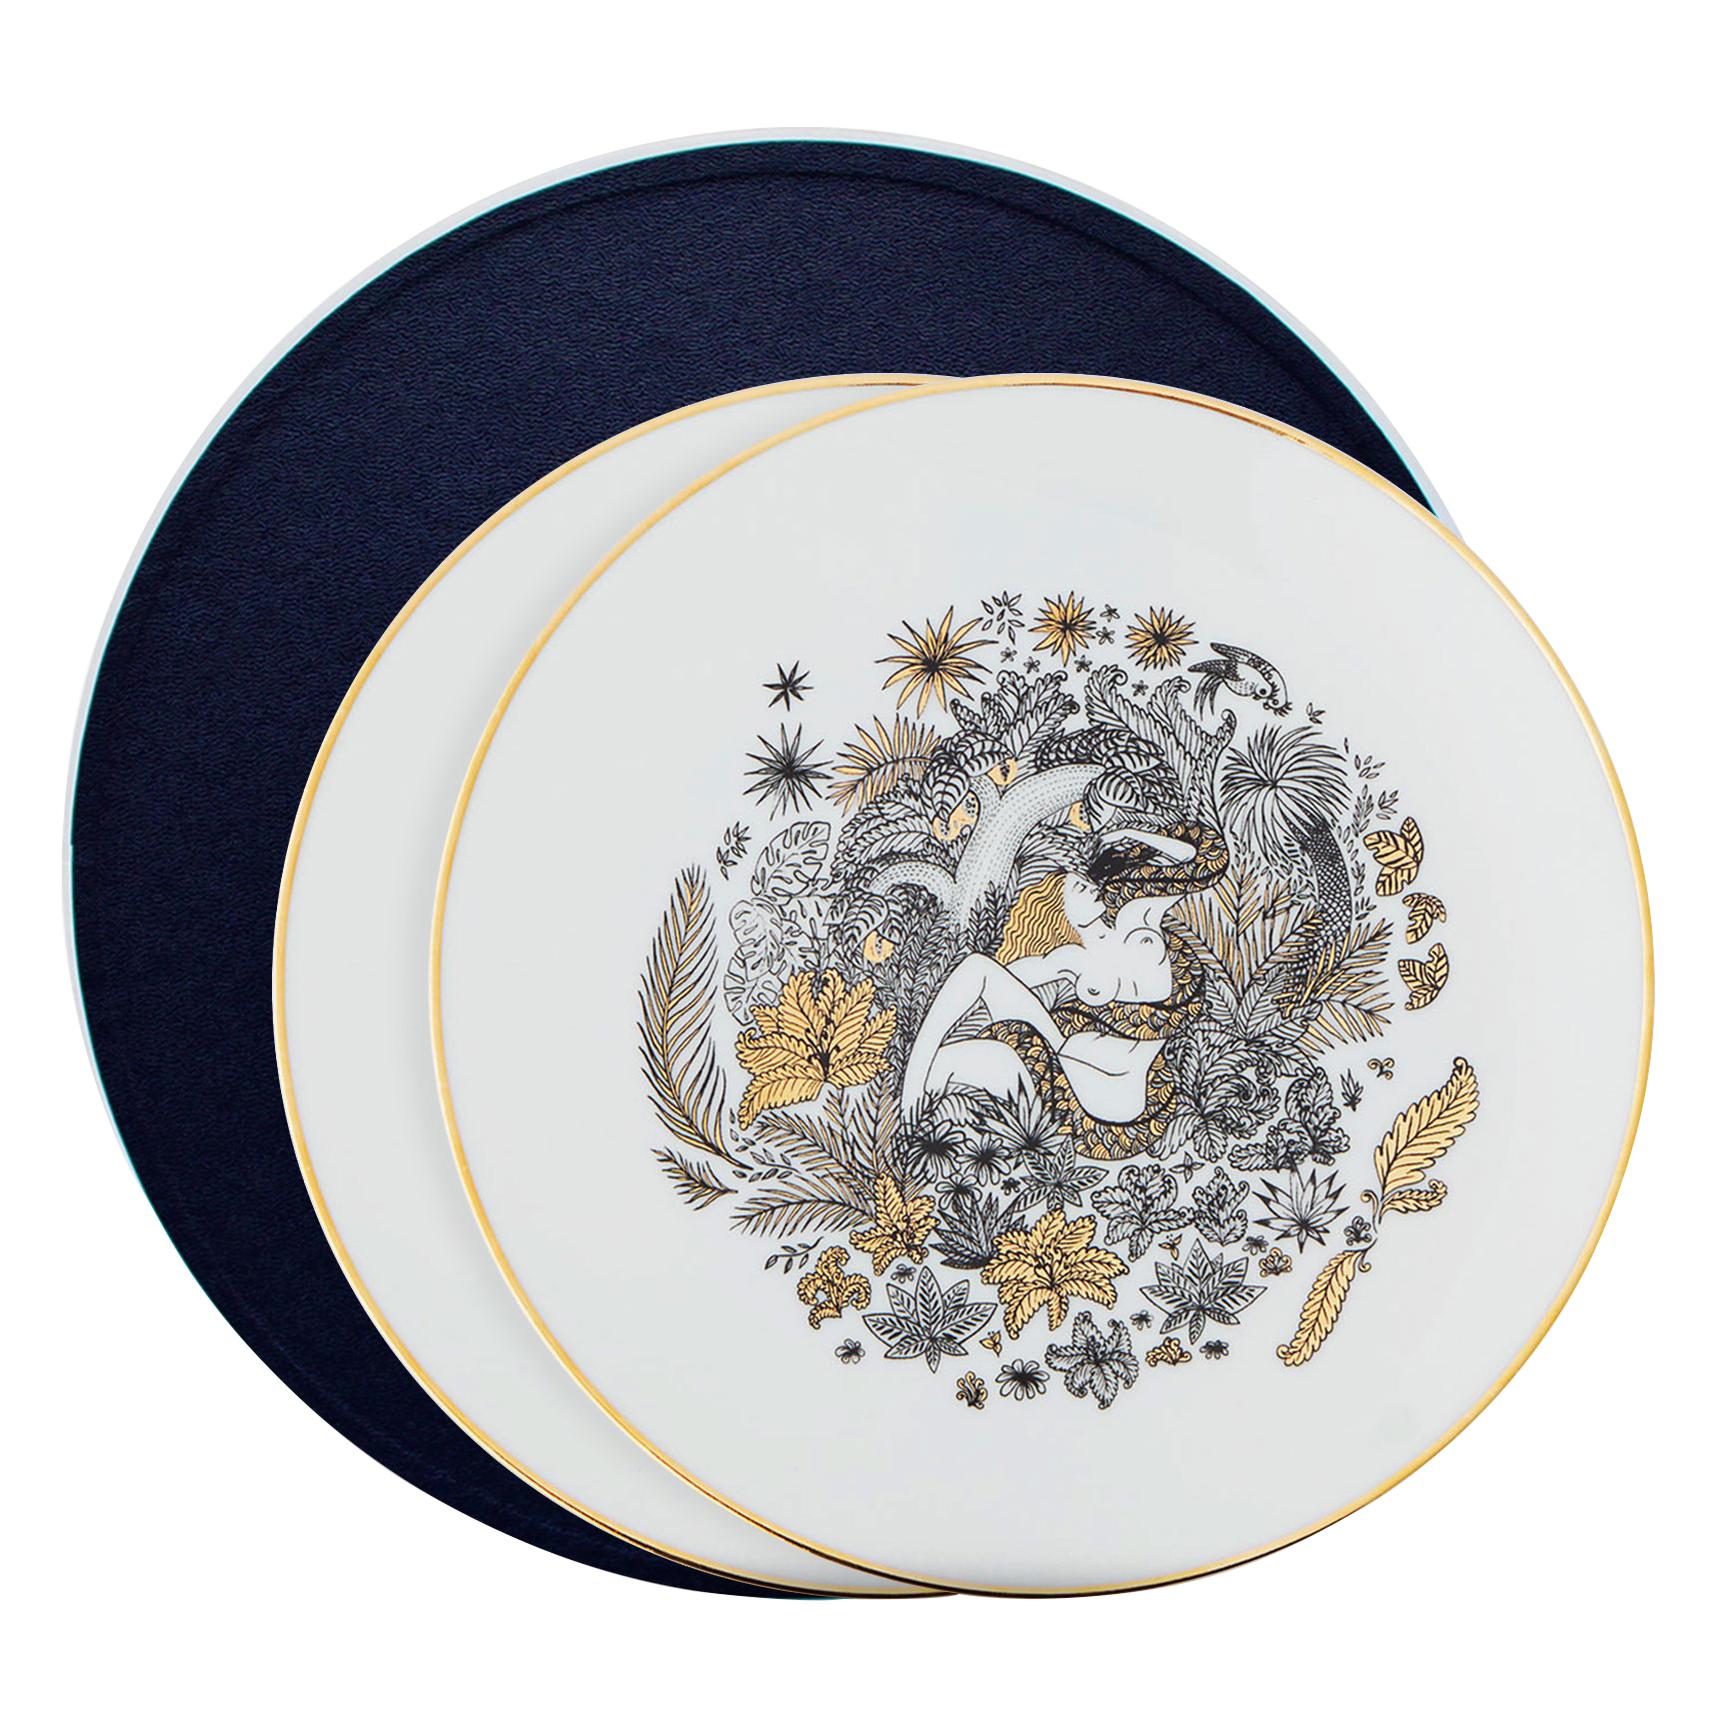 Box of 2 Dinner Porcelain Plates with Gold Collection Rue de Paradis For Sale